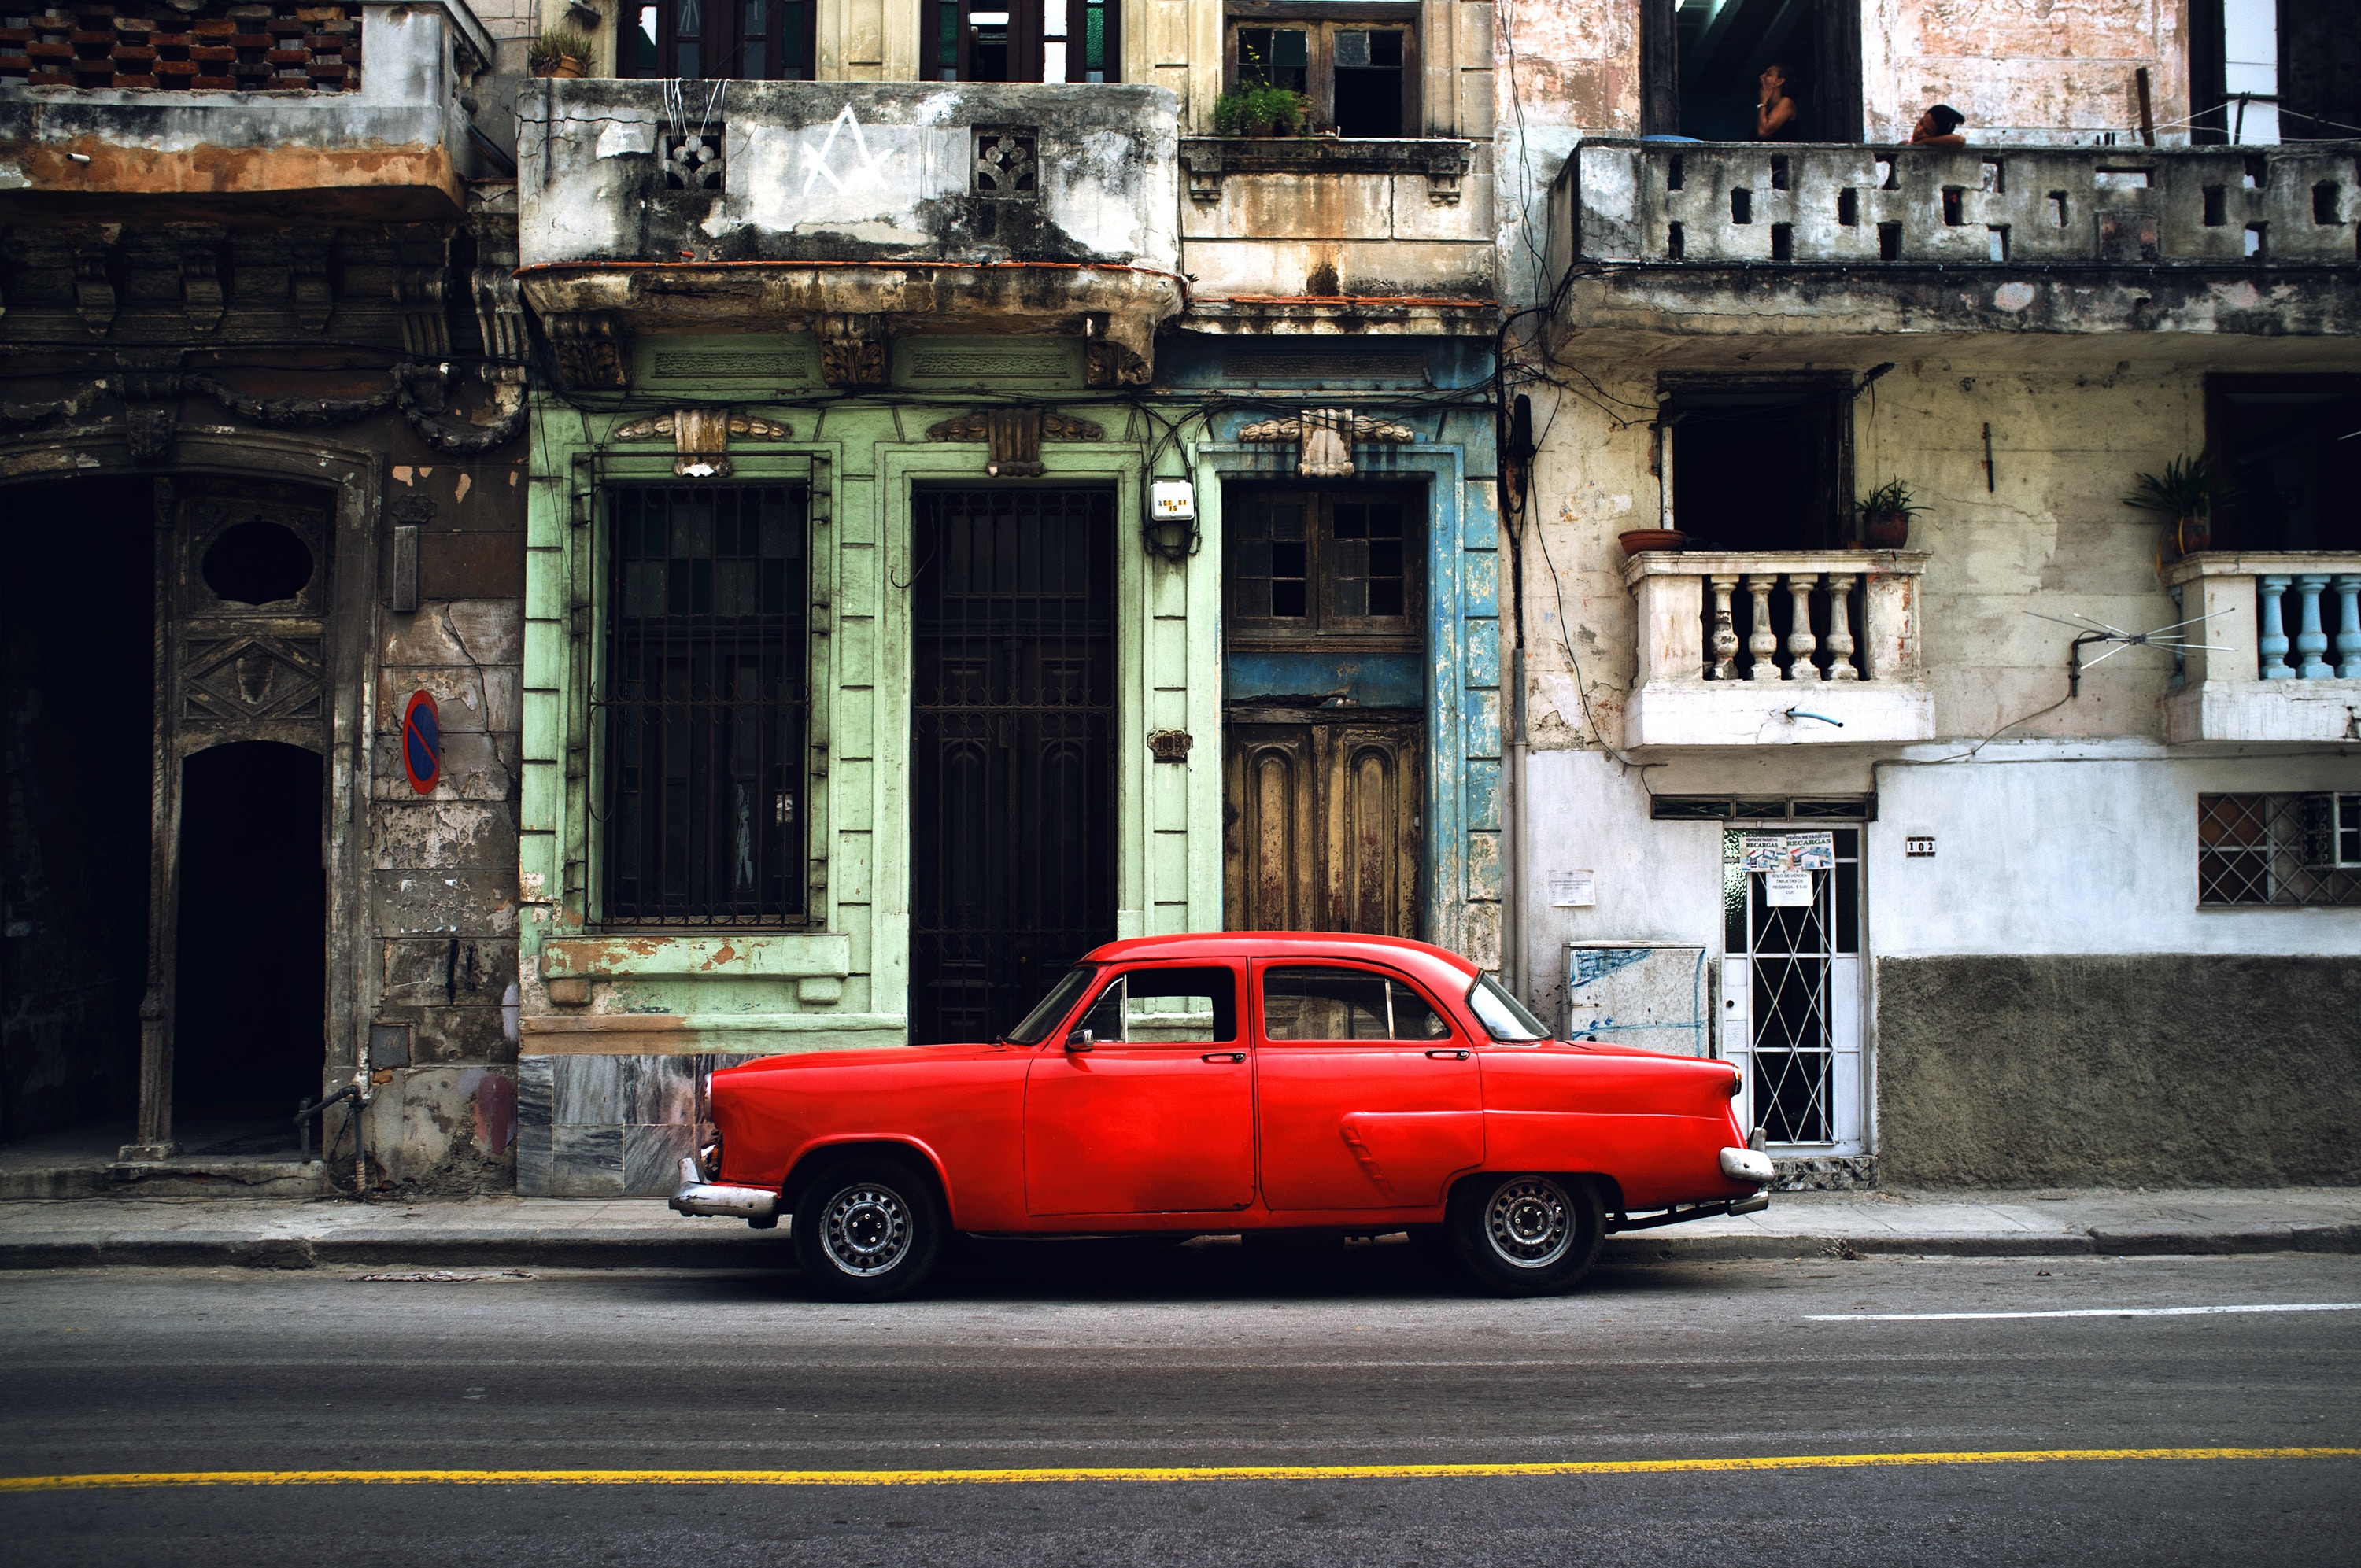 The Highs And Lows Of A Journey Through Cuba